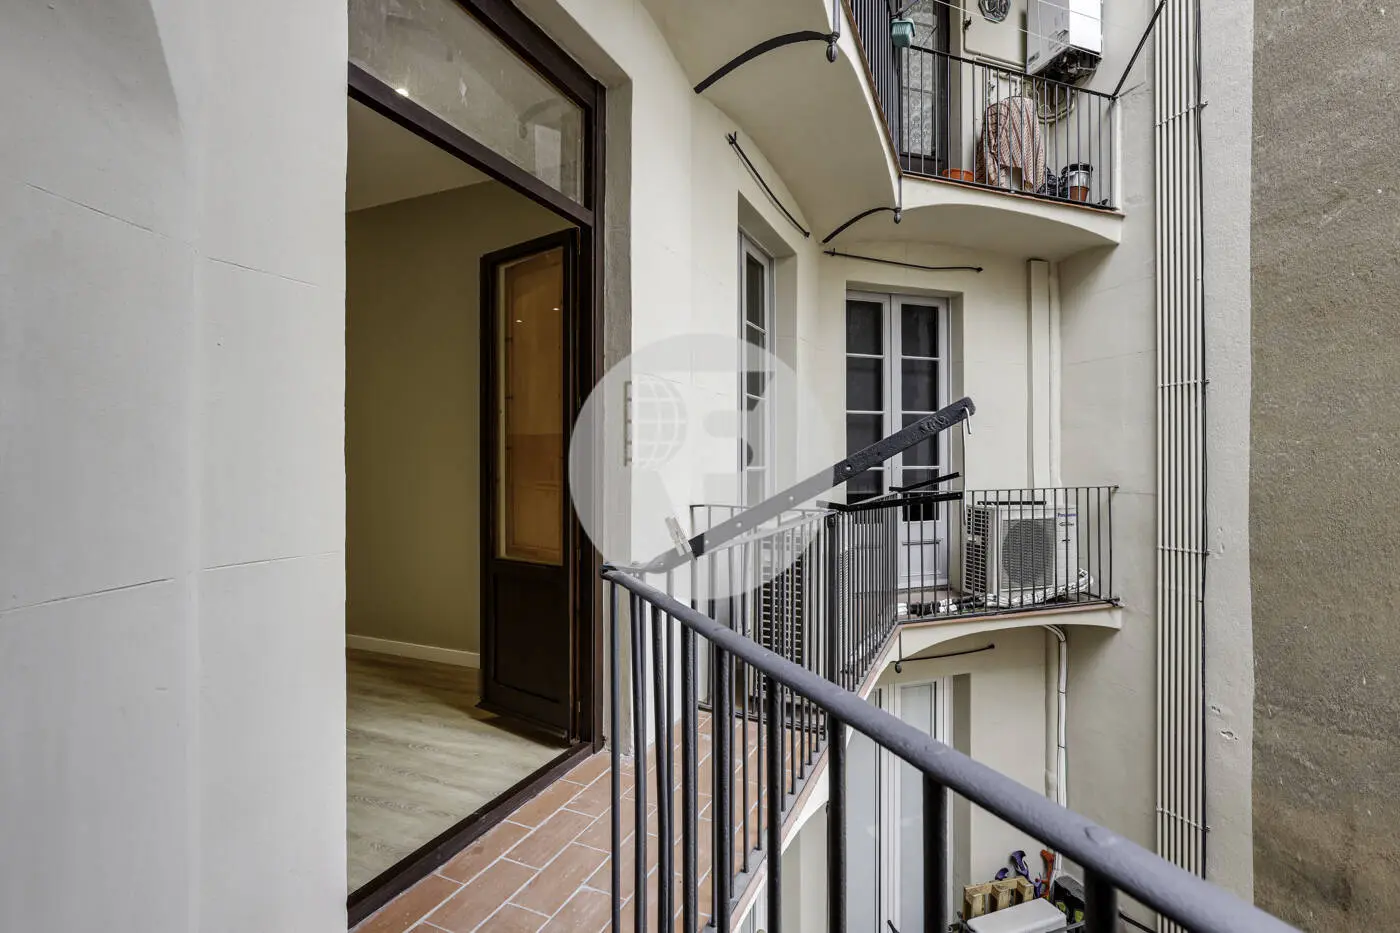 Magnificent brand new apartment in a rehabilitated royal estate in L'Antiga Esquerra de l'Eixample in Barcelona, one of the most emblematic areas of Barcelona. 21